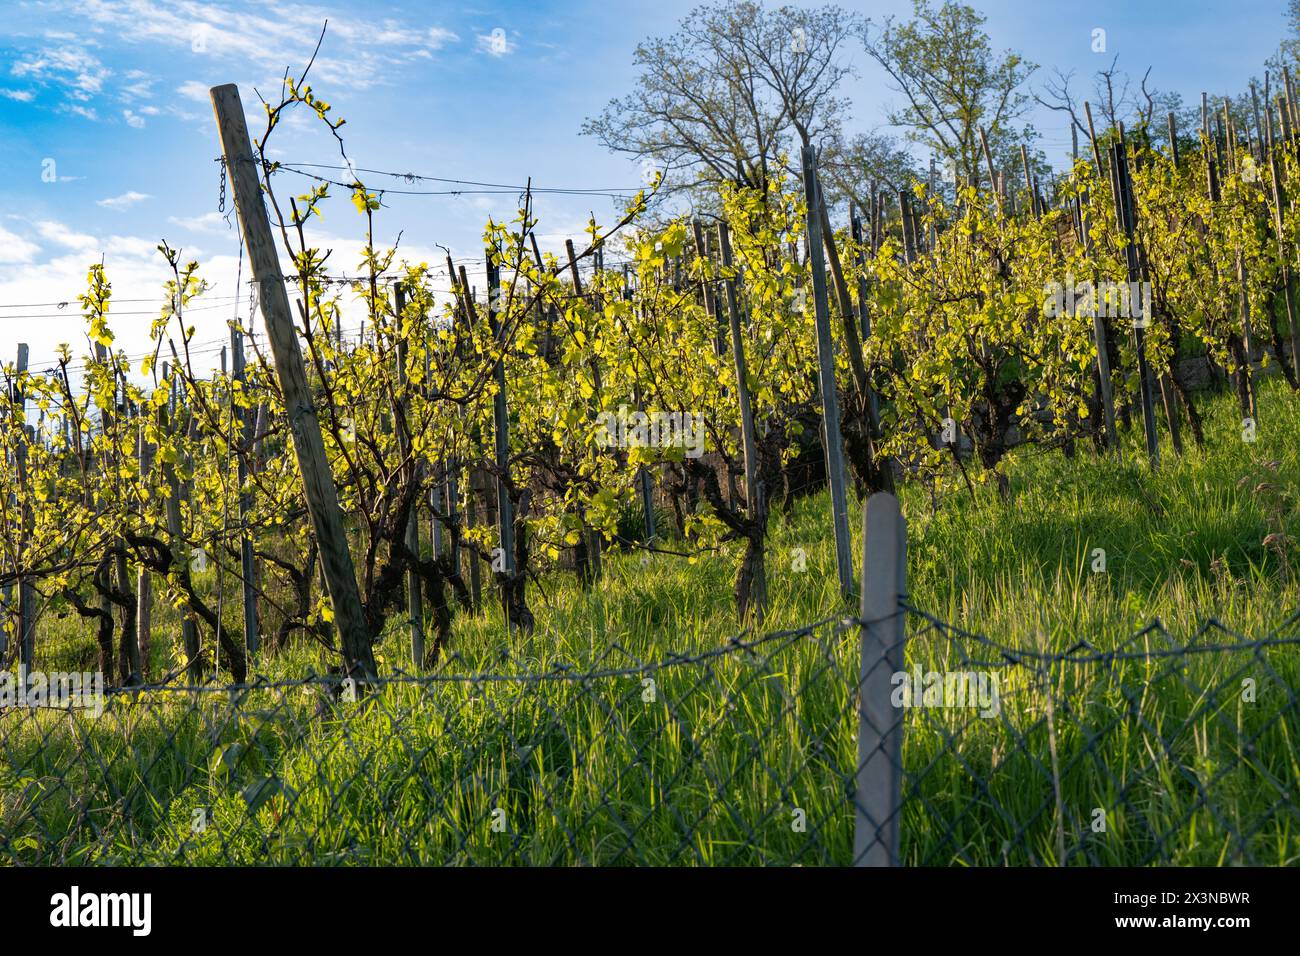 View over the fence: Vines with young shoots and leaves. Stock Photo